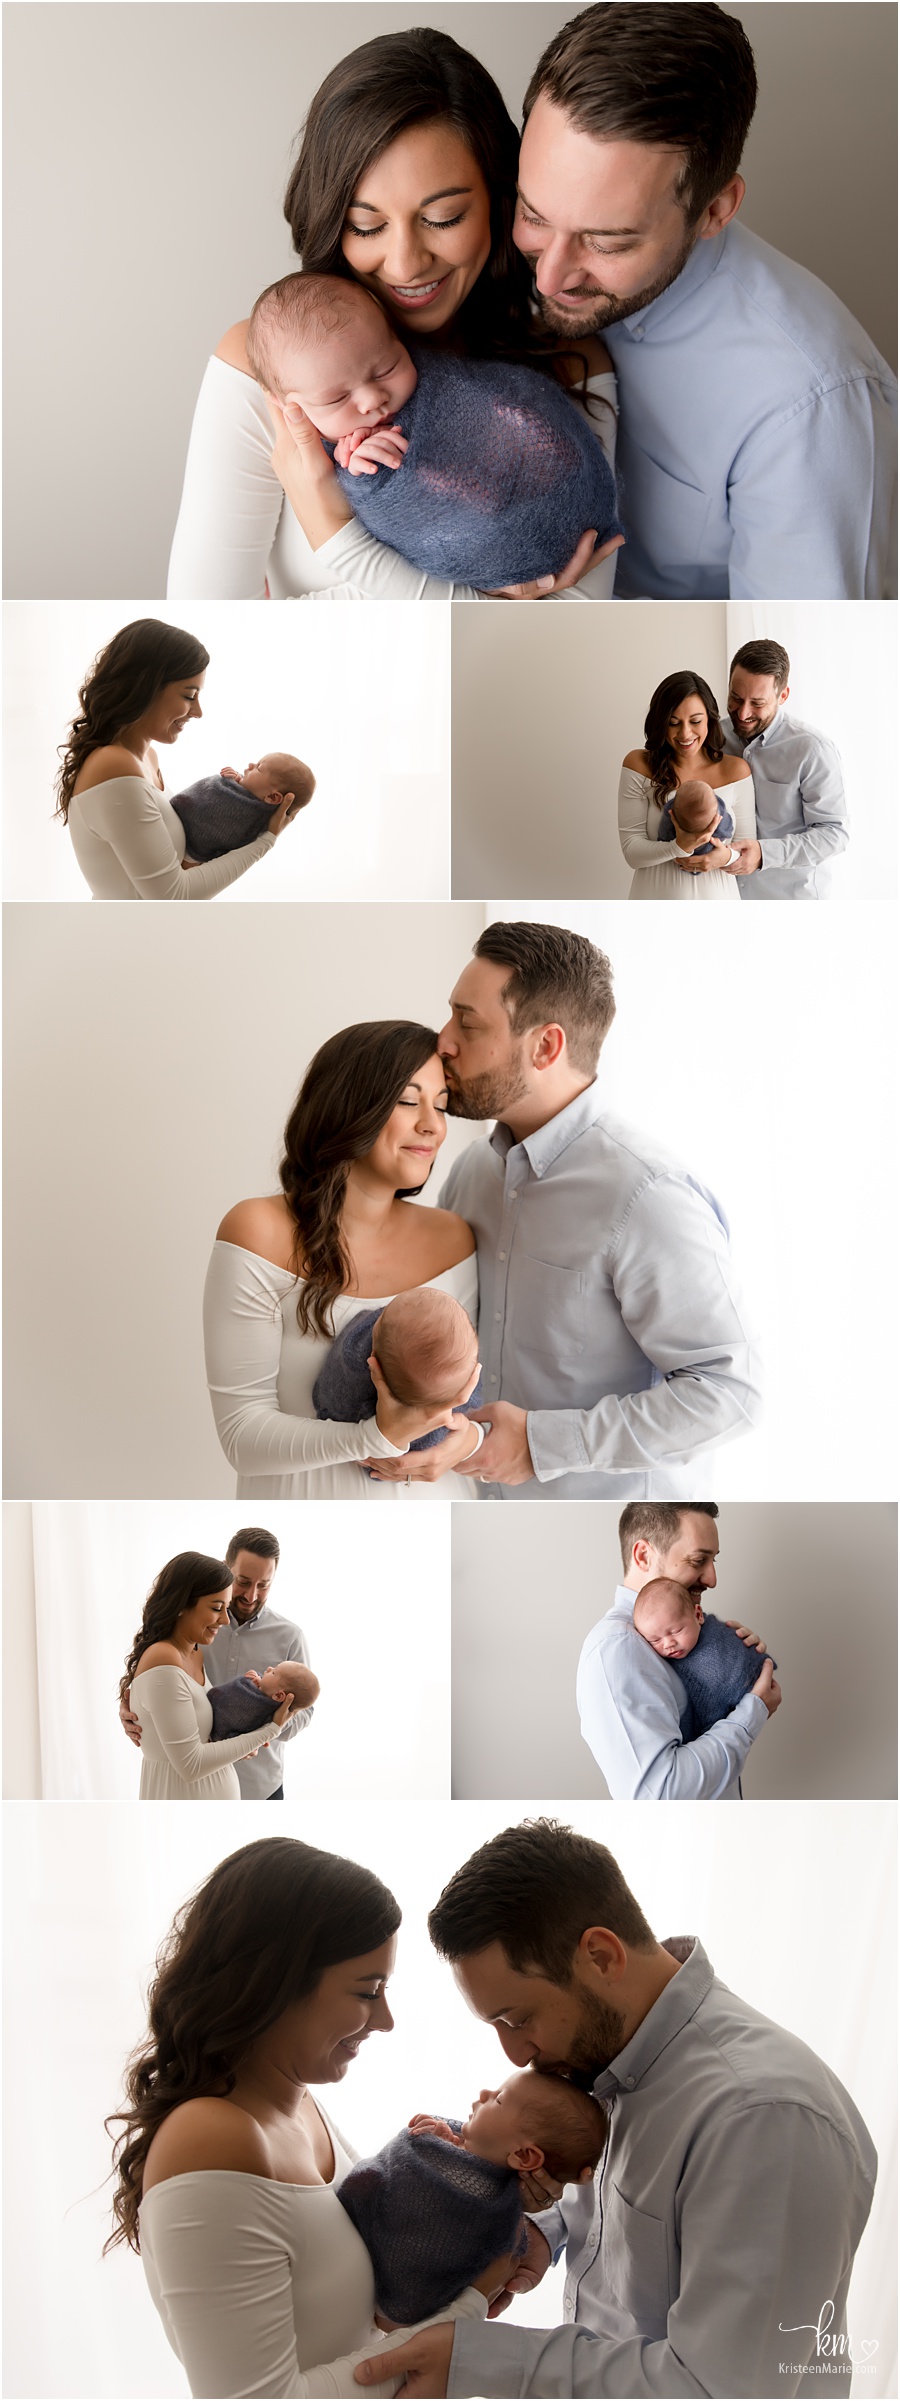 family poses in studio with newborn baby boy